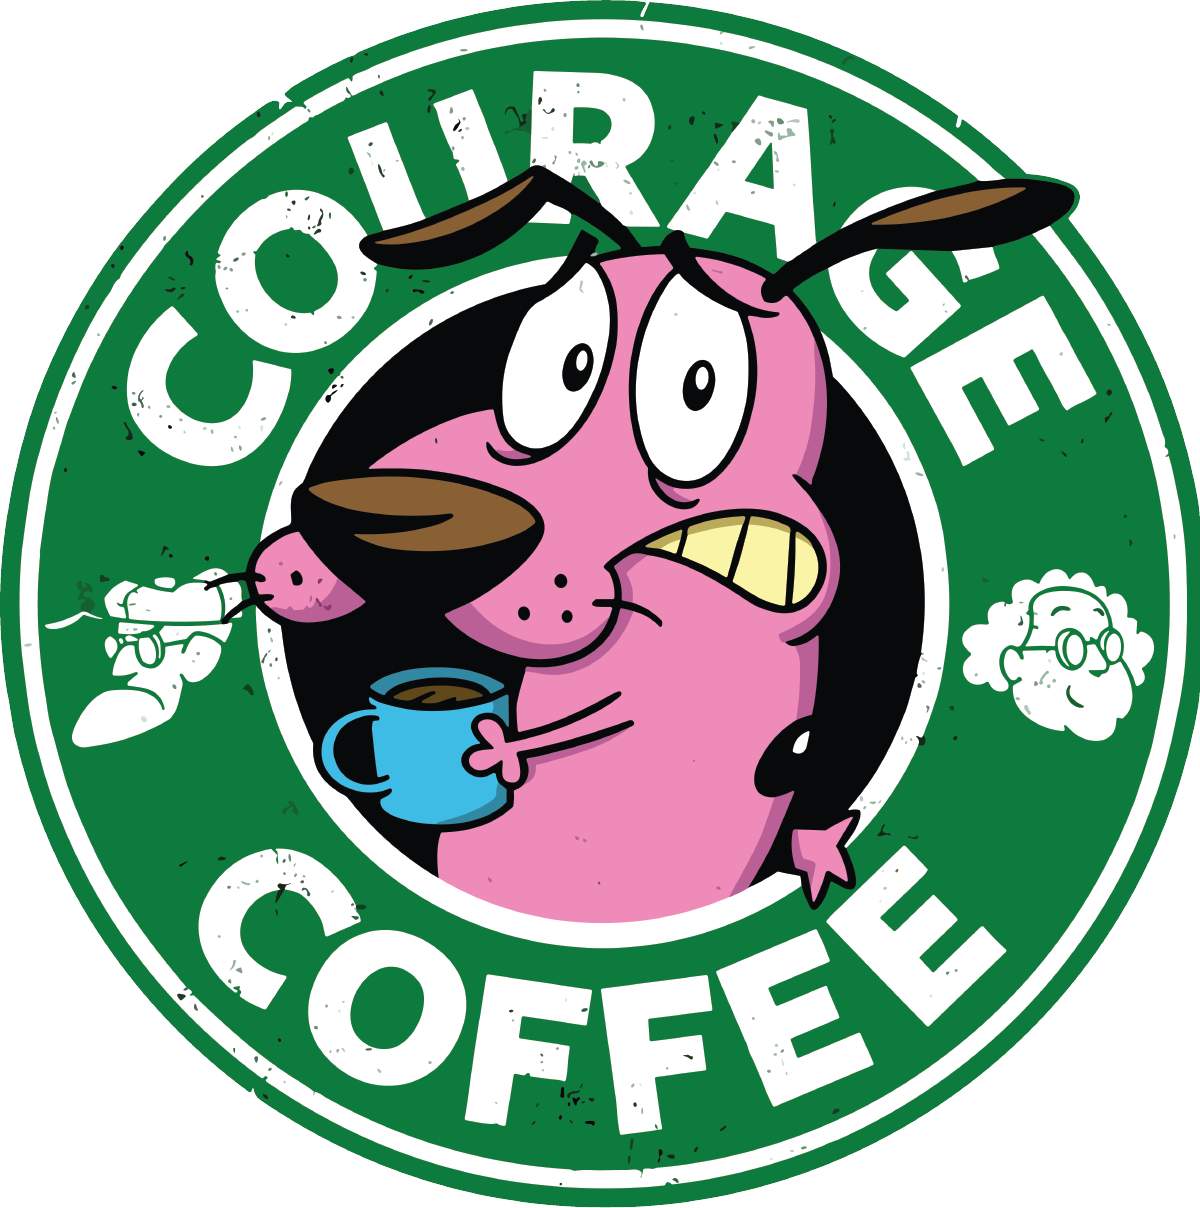 Courage Coffee Courage the cowardly dog